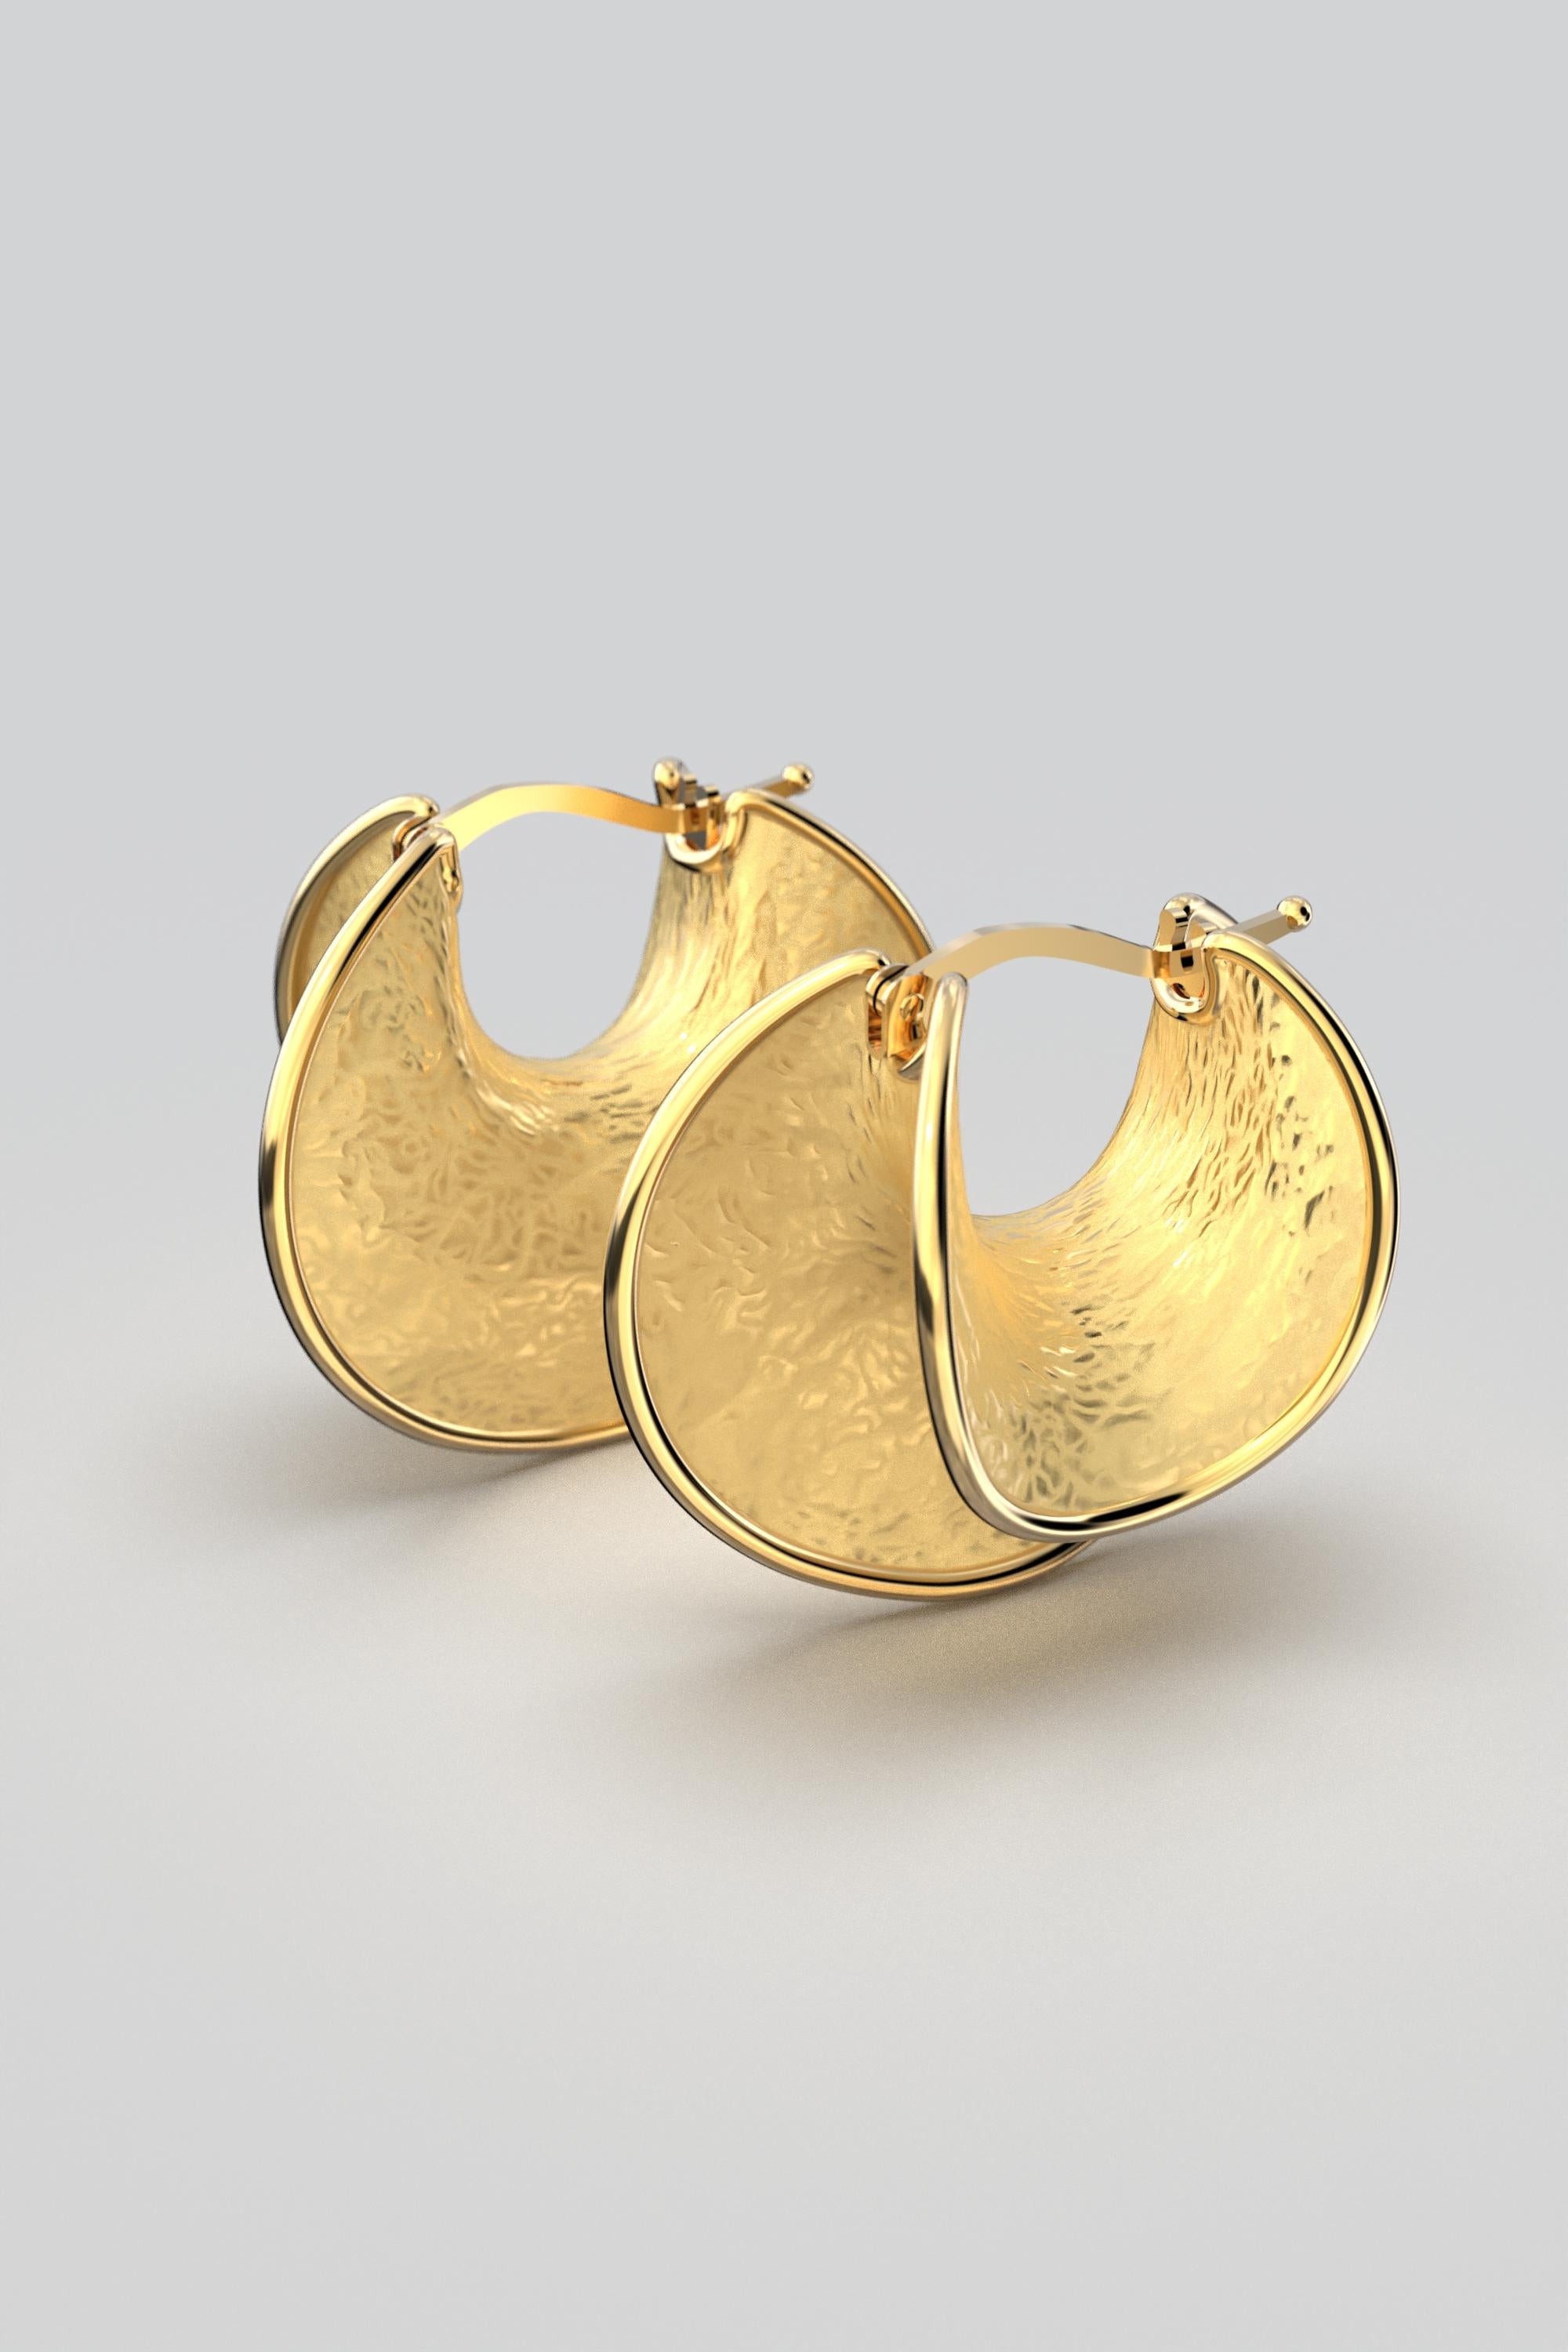 Modern 14k Gold Hoop Earrings Made in Italy by Oltremare Gioielli For Sale